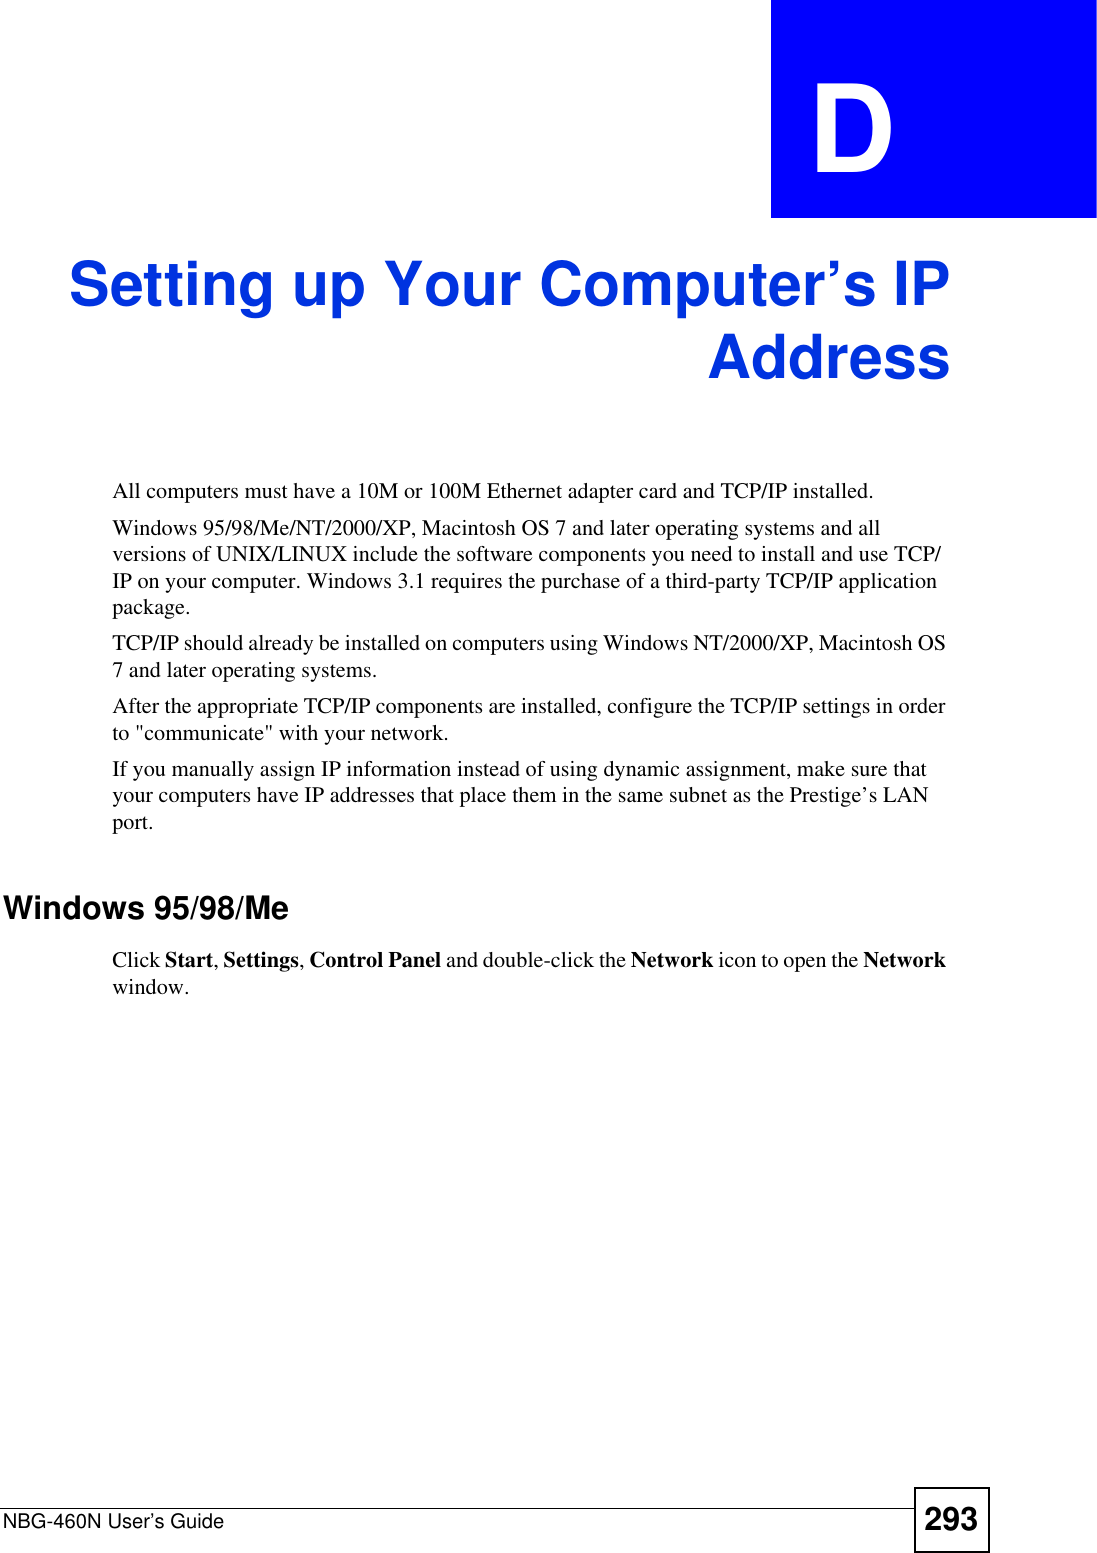 NBG-460N User’s Guide 293APPENDIX  D Setting up Your Computer’s IPAddressAll computers must have a 10M or 100M Ethernet adapter card and TCP/IP installed. Windows 95/98/Me/NT/2000/XP, Macintosh OS 7 and later operating systems and all versions of UNIX/LINUX include the software components you need to install and use TCP/IP on your computer. Windows 3.1 requires the purchase of a third-party TCP/IP application package.TCP/IP should already be installed on computers using Windows NT/2000/XP, Macintosh OS 7 and later operating systems.After the appropriate TCP/IP components are installed, configure the TCP/IP settings in order to &quot;communicate&quot; with your network. If you manually assign IP information instead of using dynamic assignment, make sure that your computers have IP addresses that place them in the same subnet as the Prestige’s LAN port.Windows 95/98/MeClick Start,Settings,Control Panel and double-click the Network icon to open the Network window.